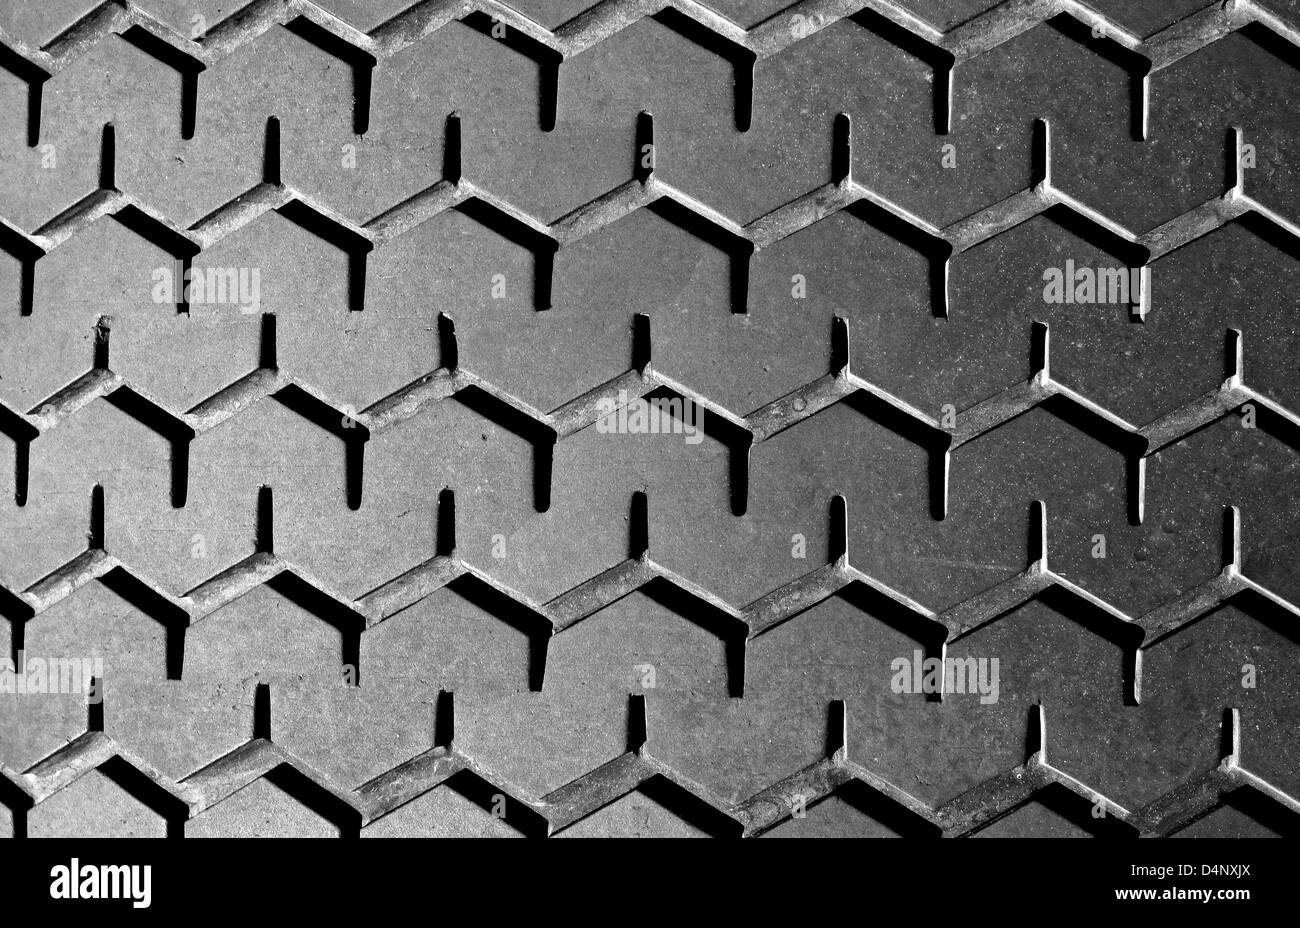 Close up view of tire treads. Can be used as a background. Stock Photo